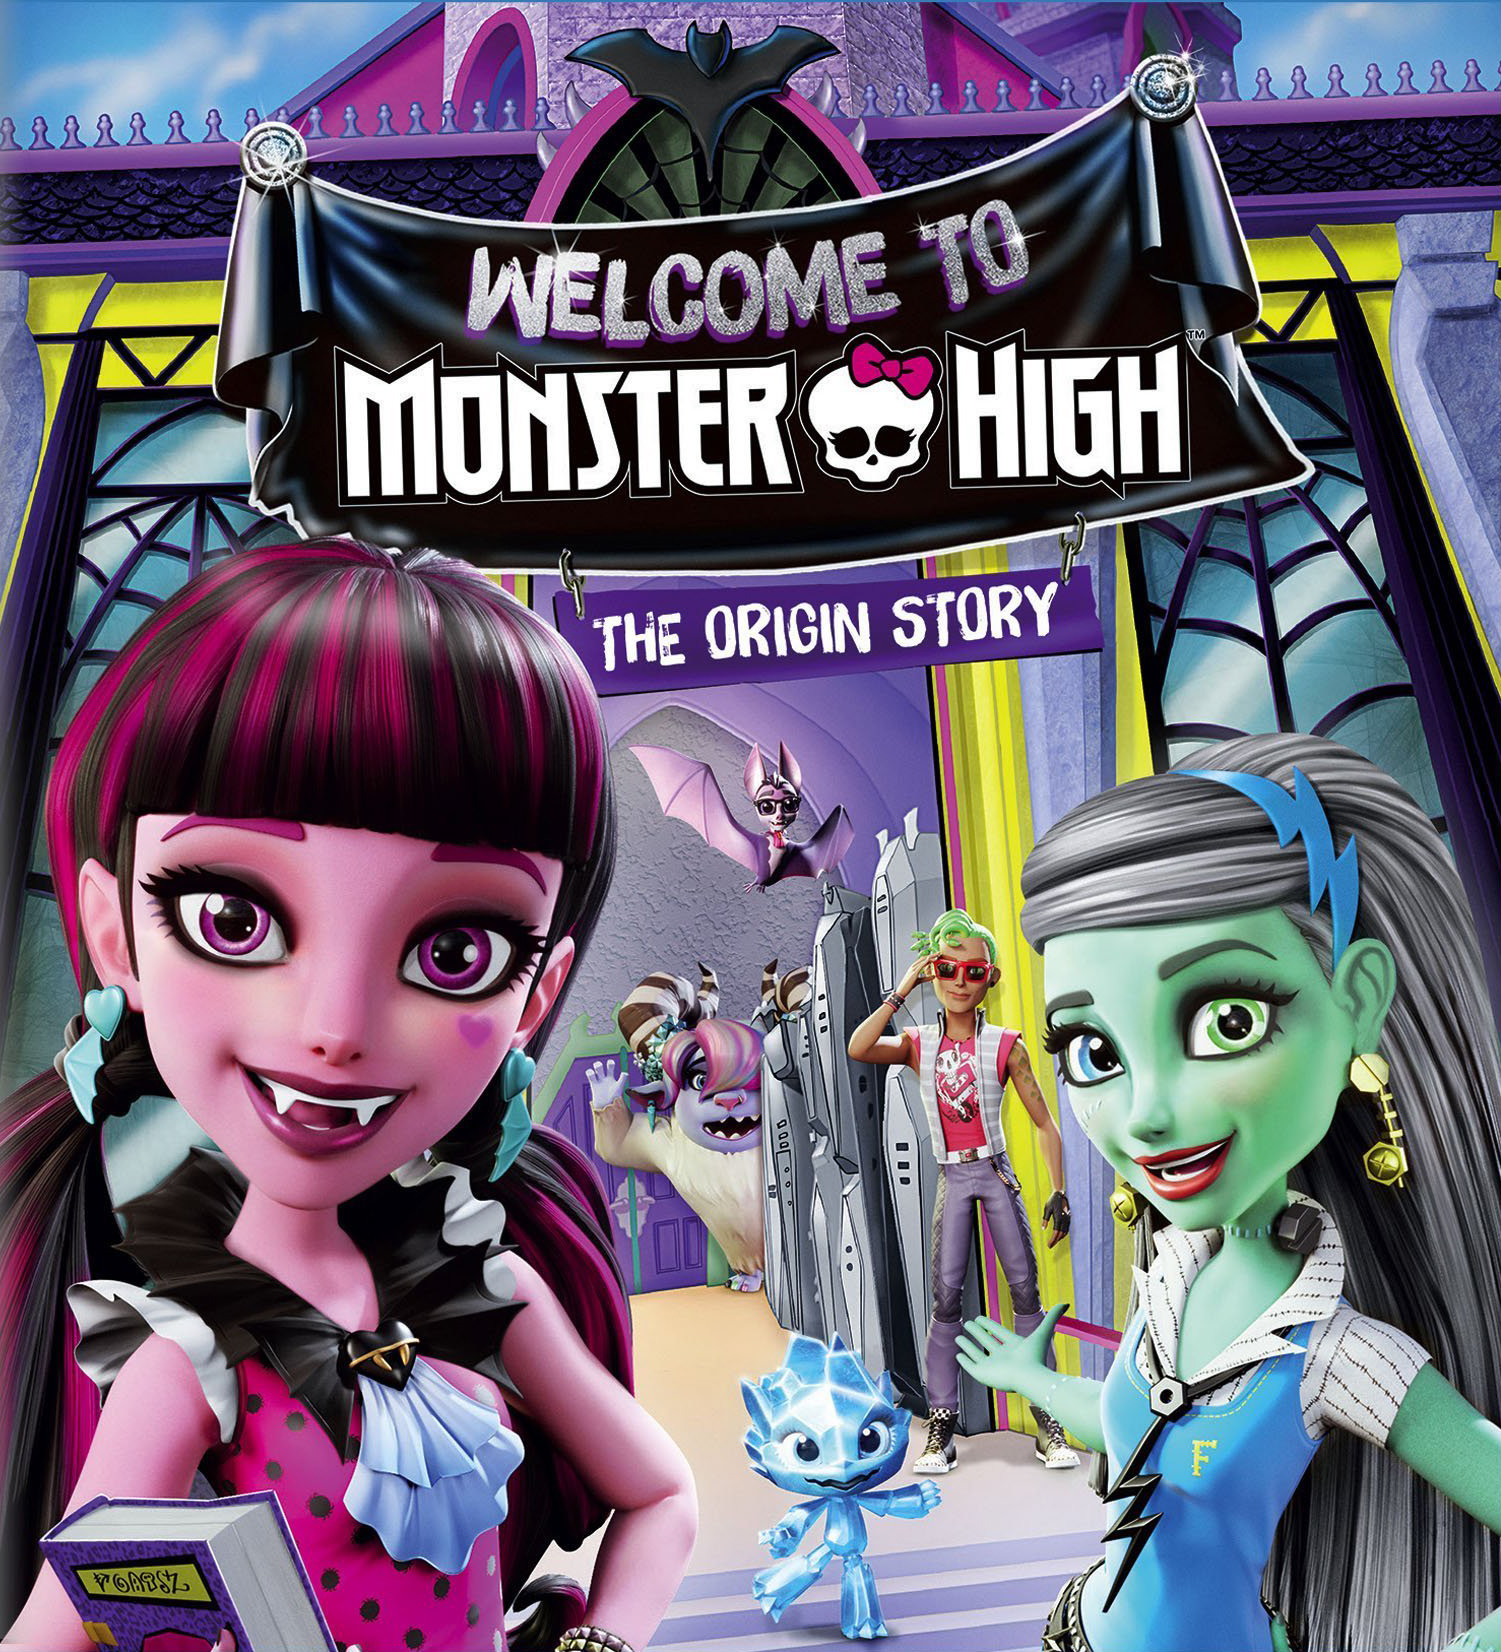 Monster_High_-_Welcome_to Monster_High